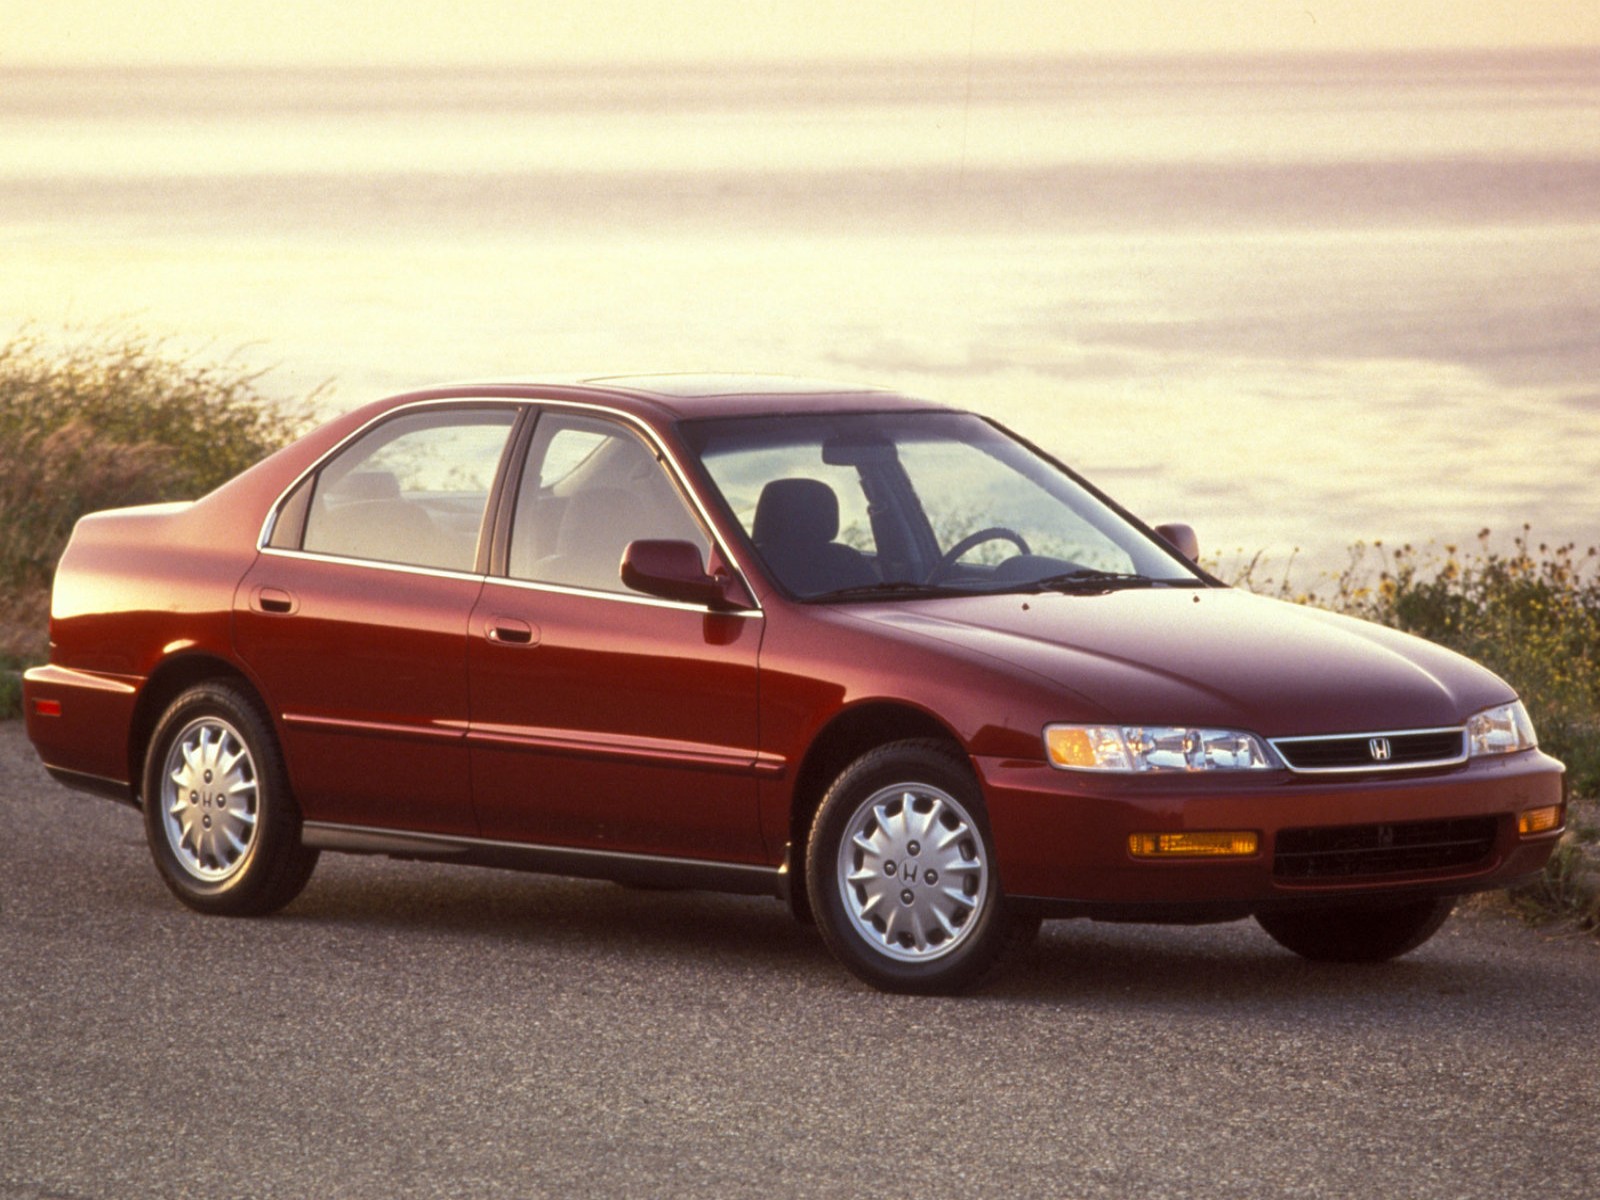 Why is the 1997 Honda Accord the Most Stolen Car in the U